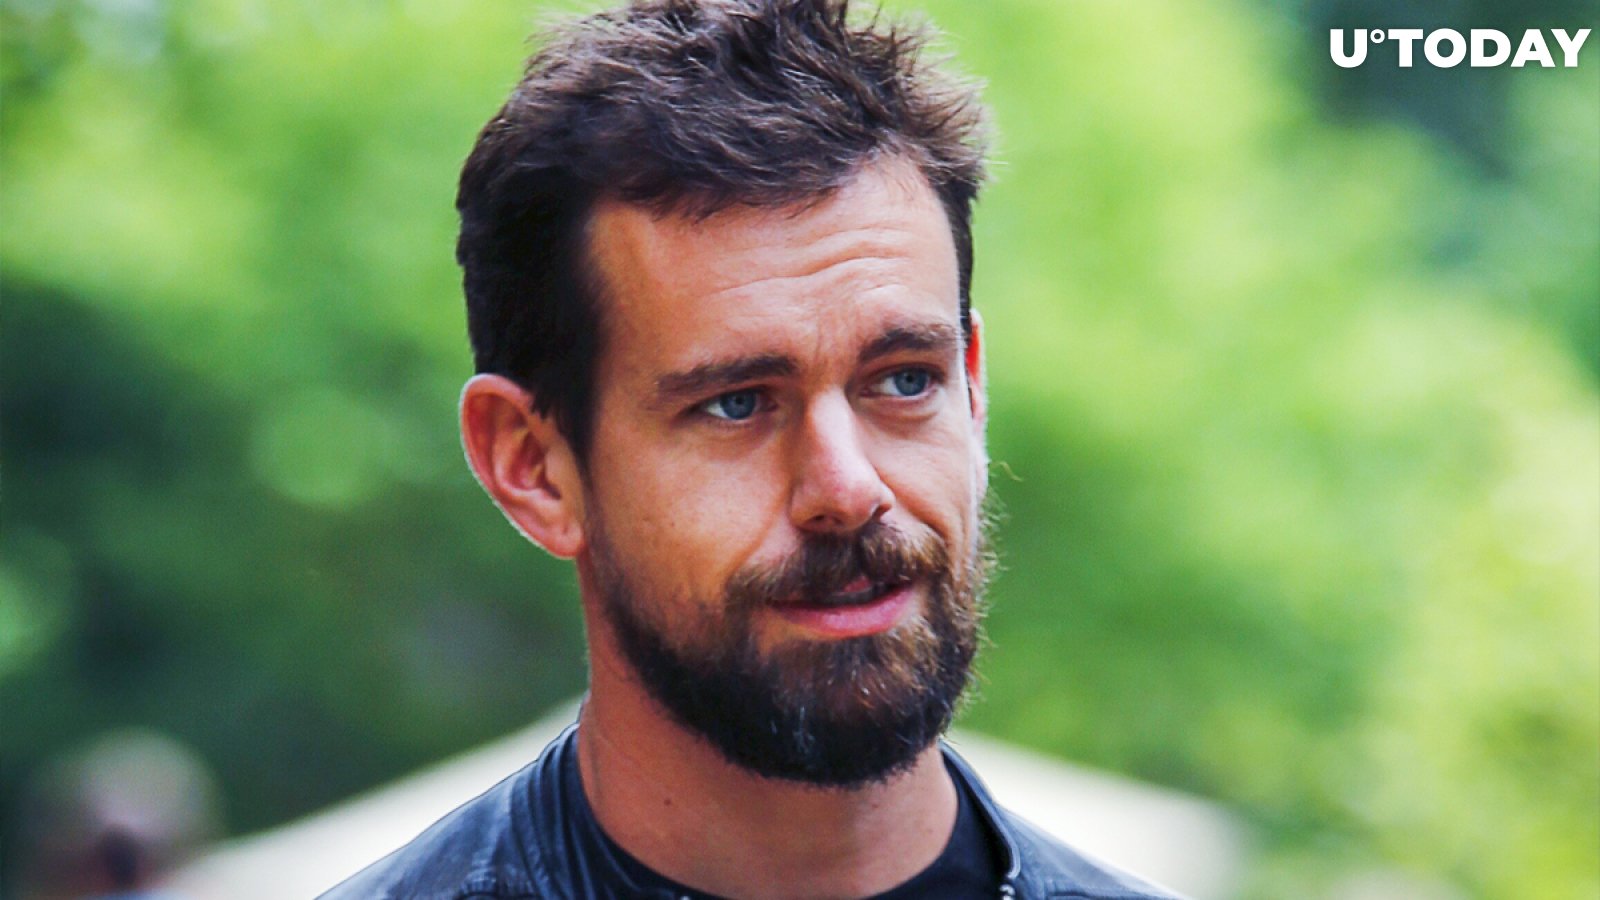 “Only Bitcoin”: Jack Dorsey Denies Owning Ethereum After Criticizing Coinbase’s Anti-Activism Stance 